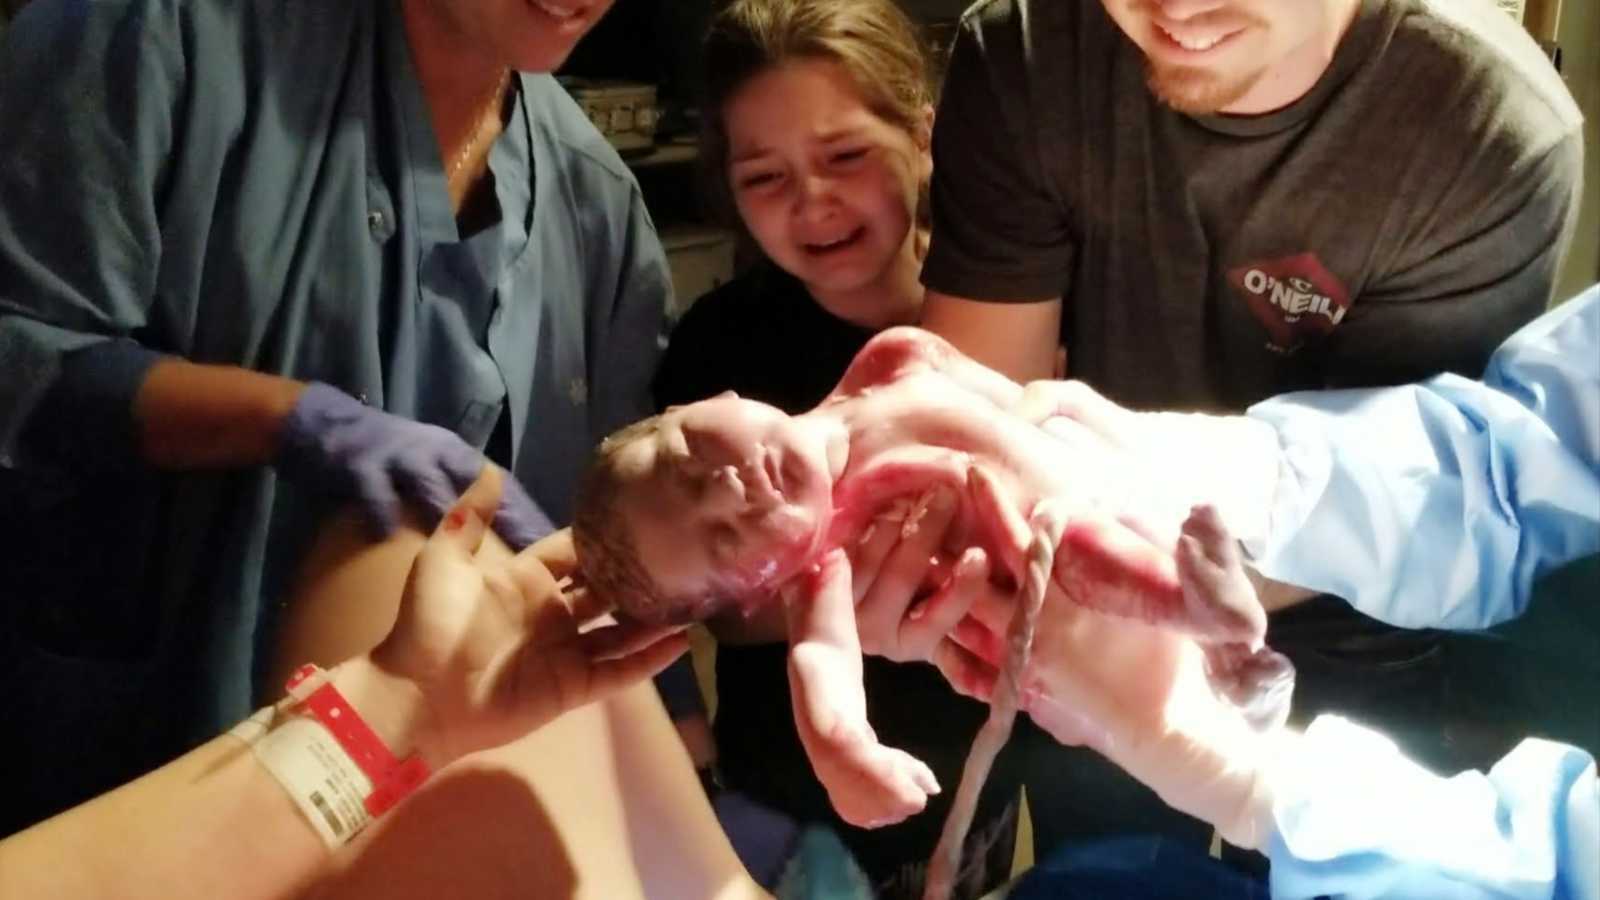 big sister and father help deliver baby with help of midwife